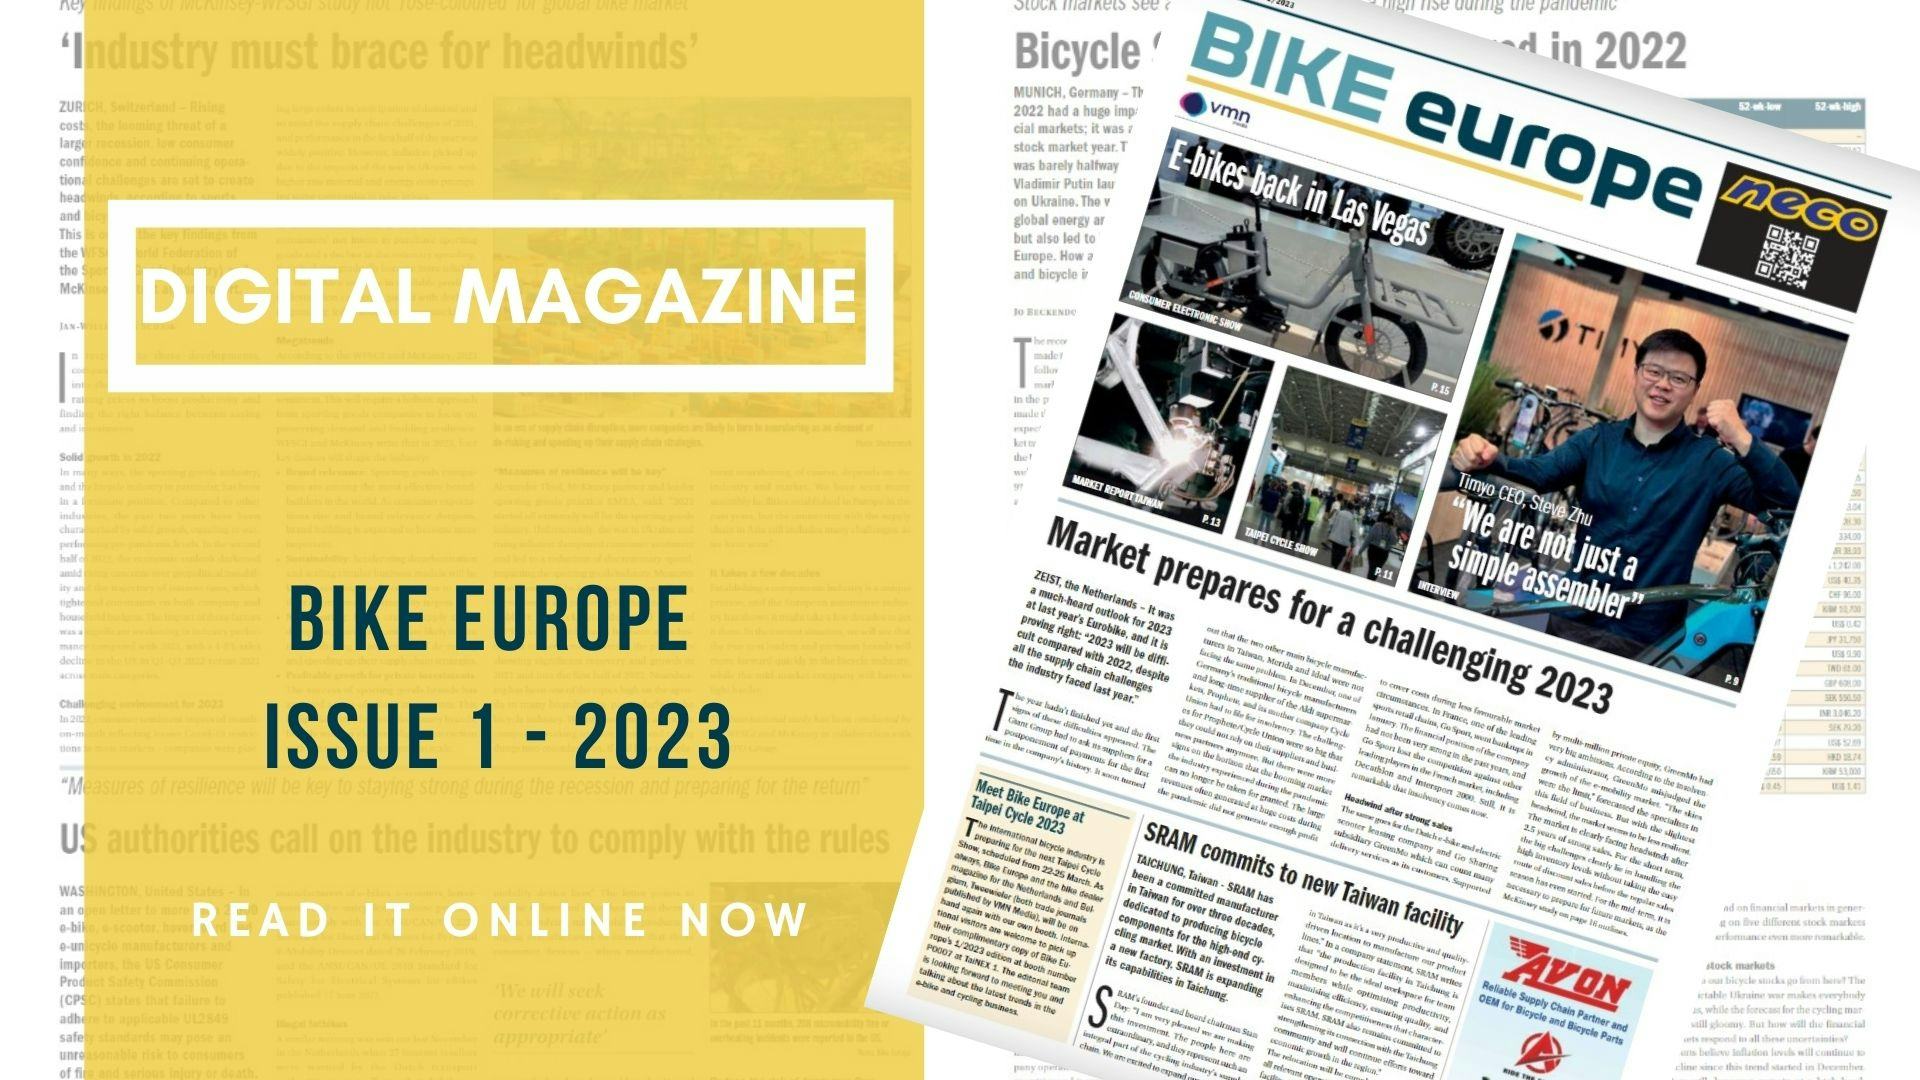 Bike Europe issue 1/2023 available online now